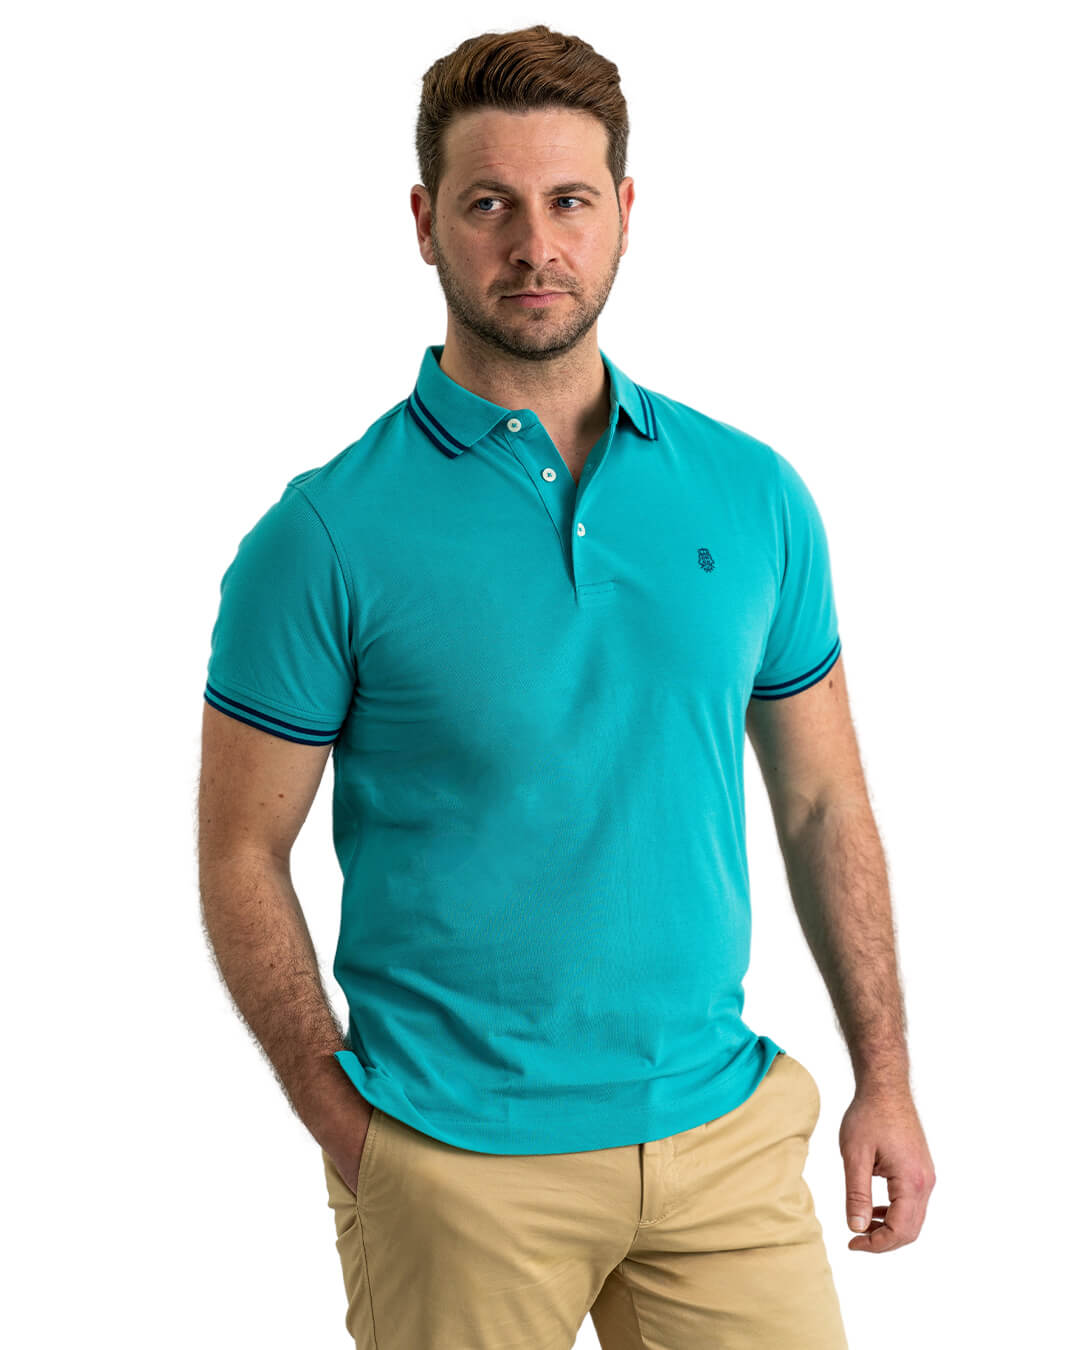 Teal Pique Polo Shirt With Double Tipped Collar & Cuff